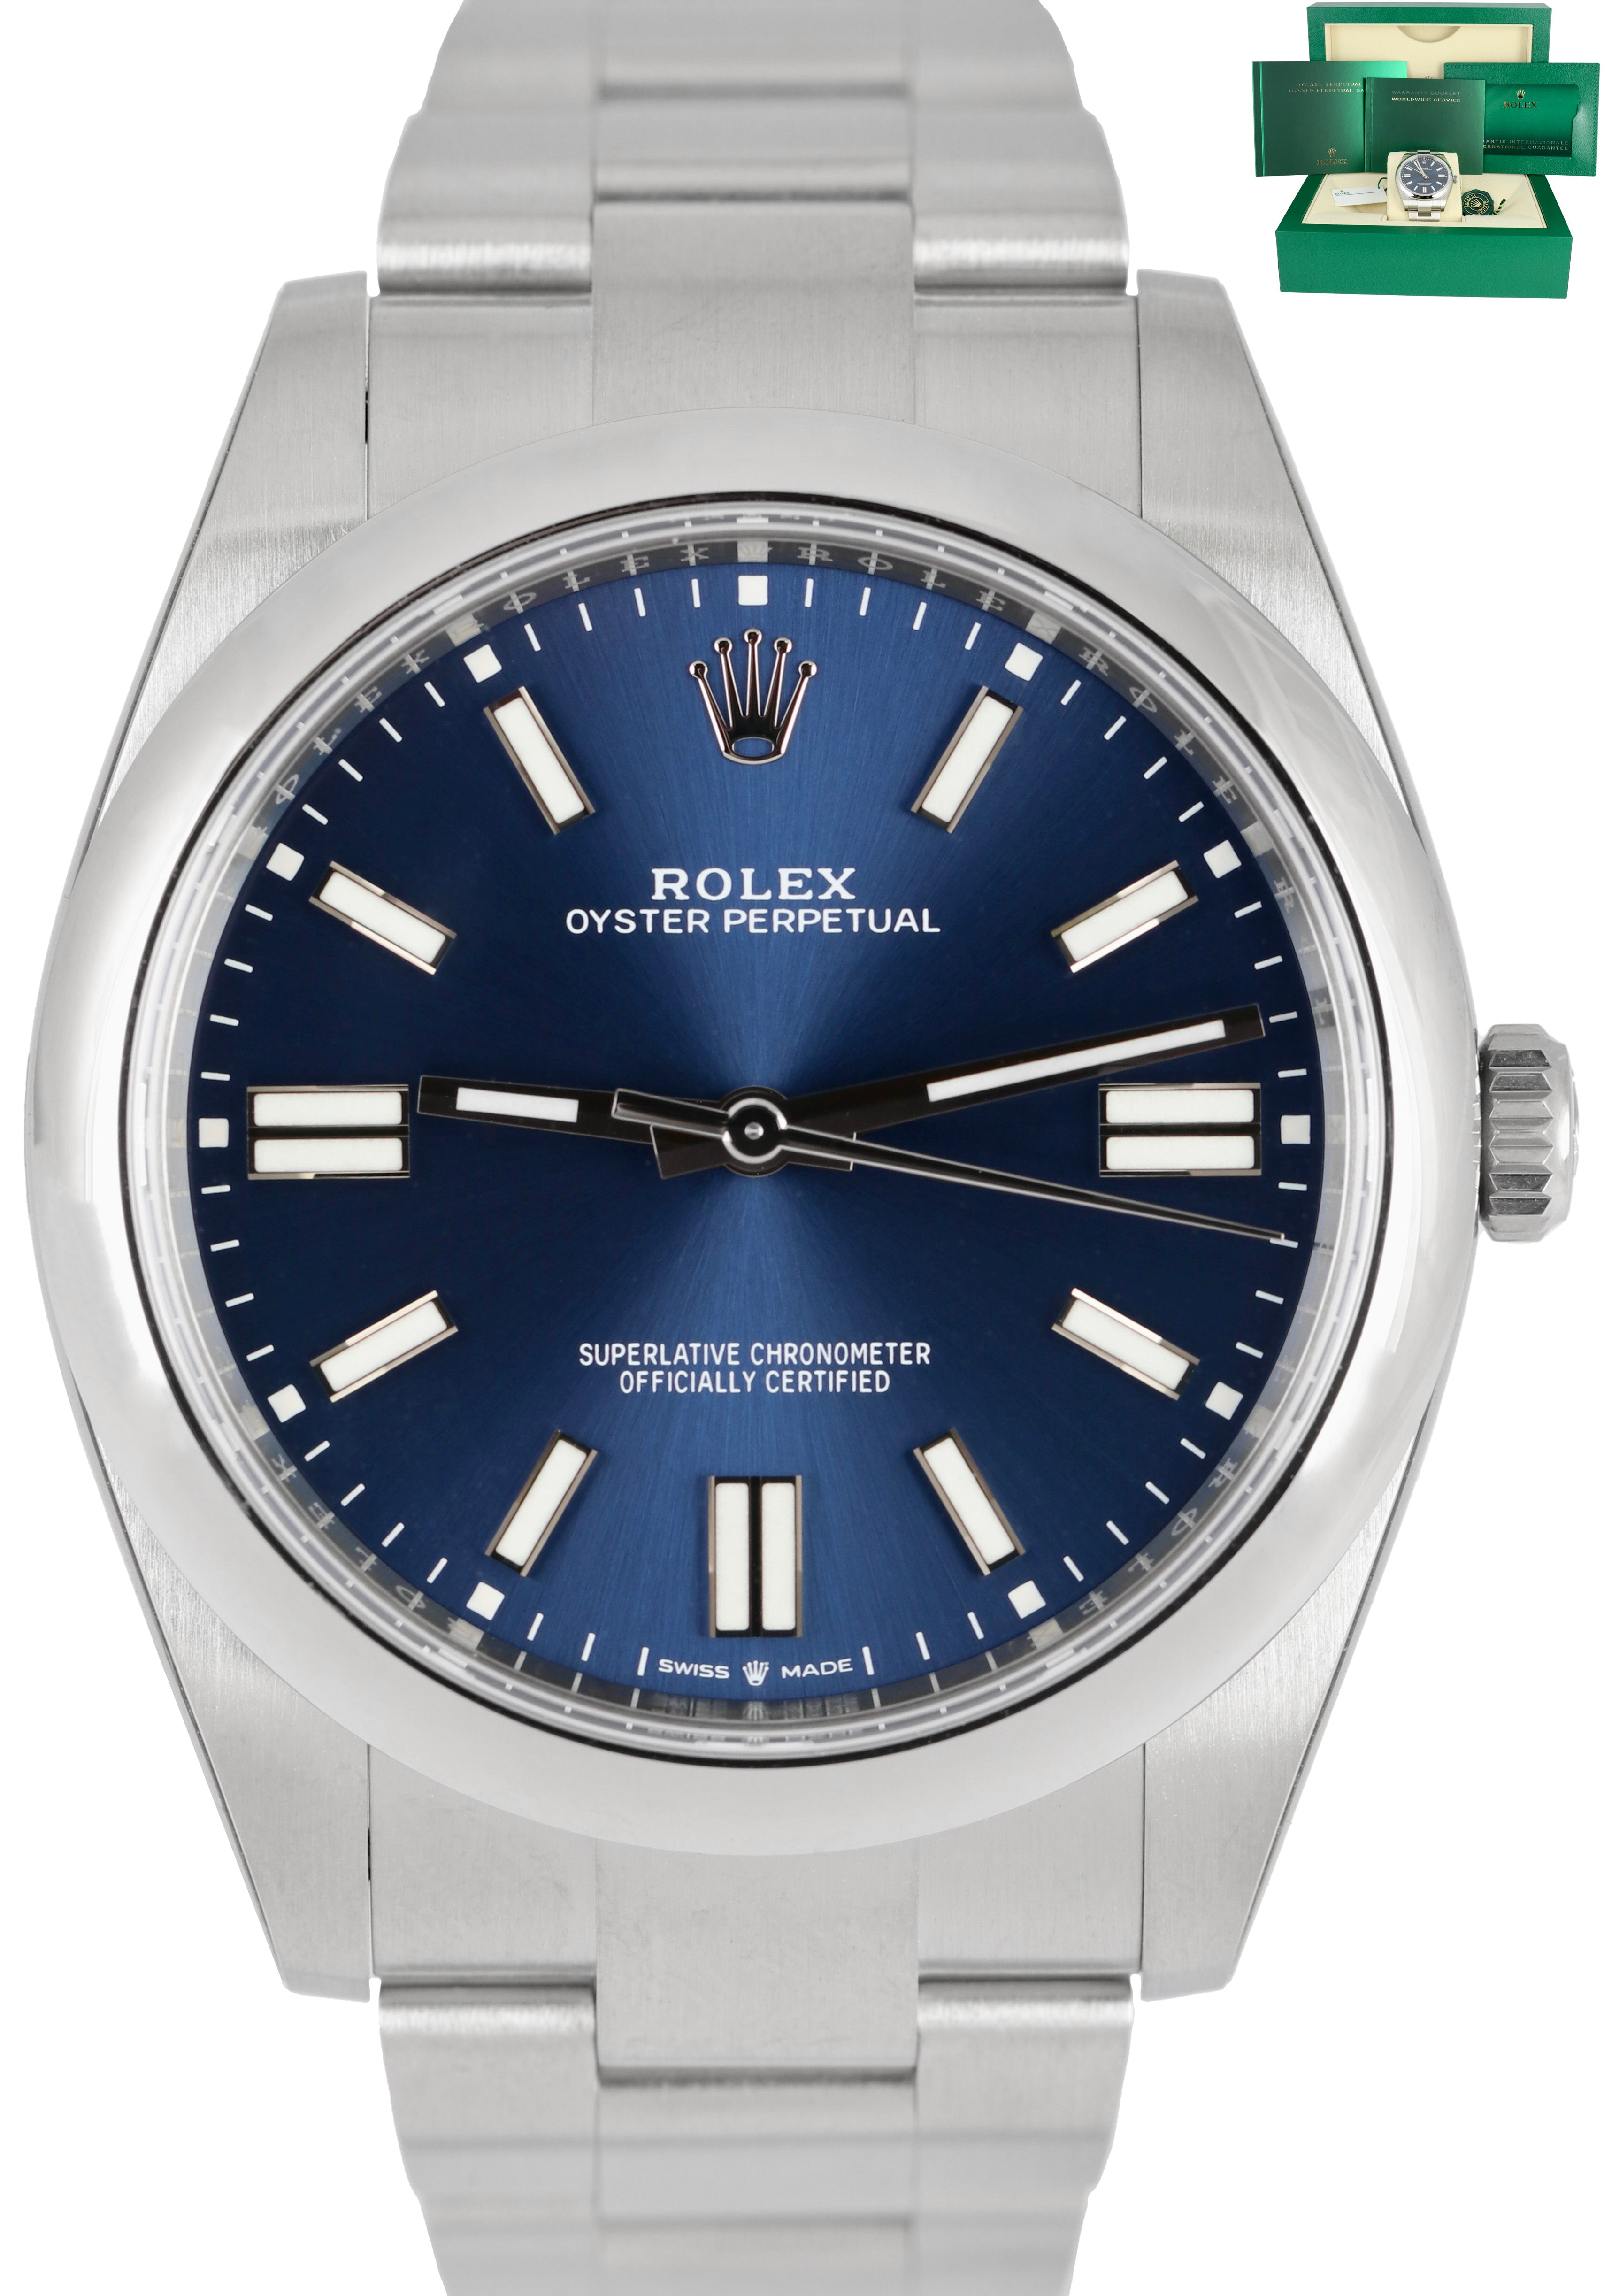 NEW STICKERED 2022 Rolex Oyster Perpetual OP 41 Blue 124300 41mm Stainless Watch